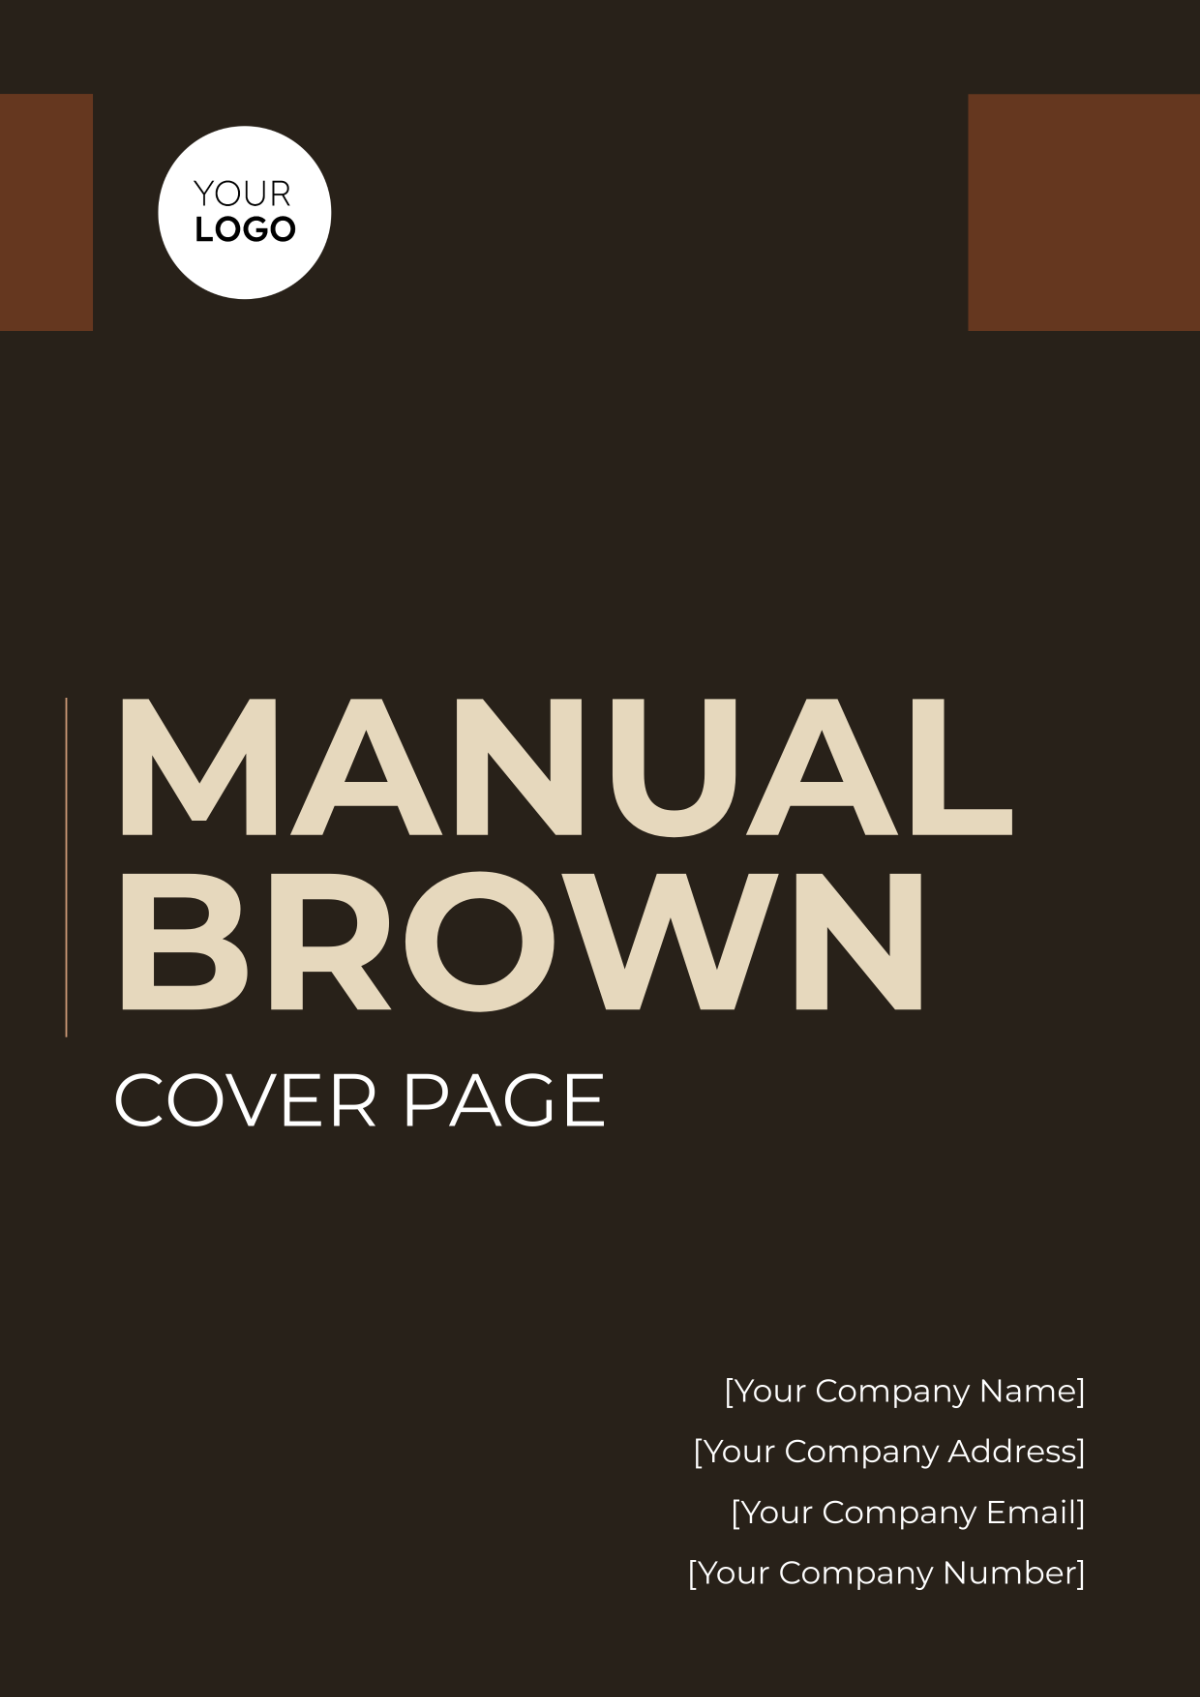 Manual Brown Cover Page